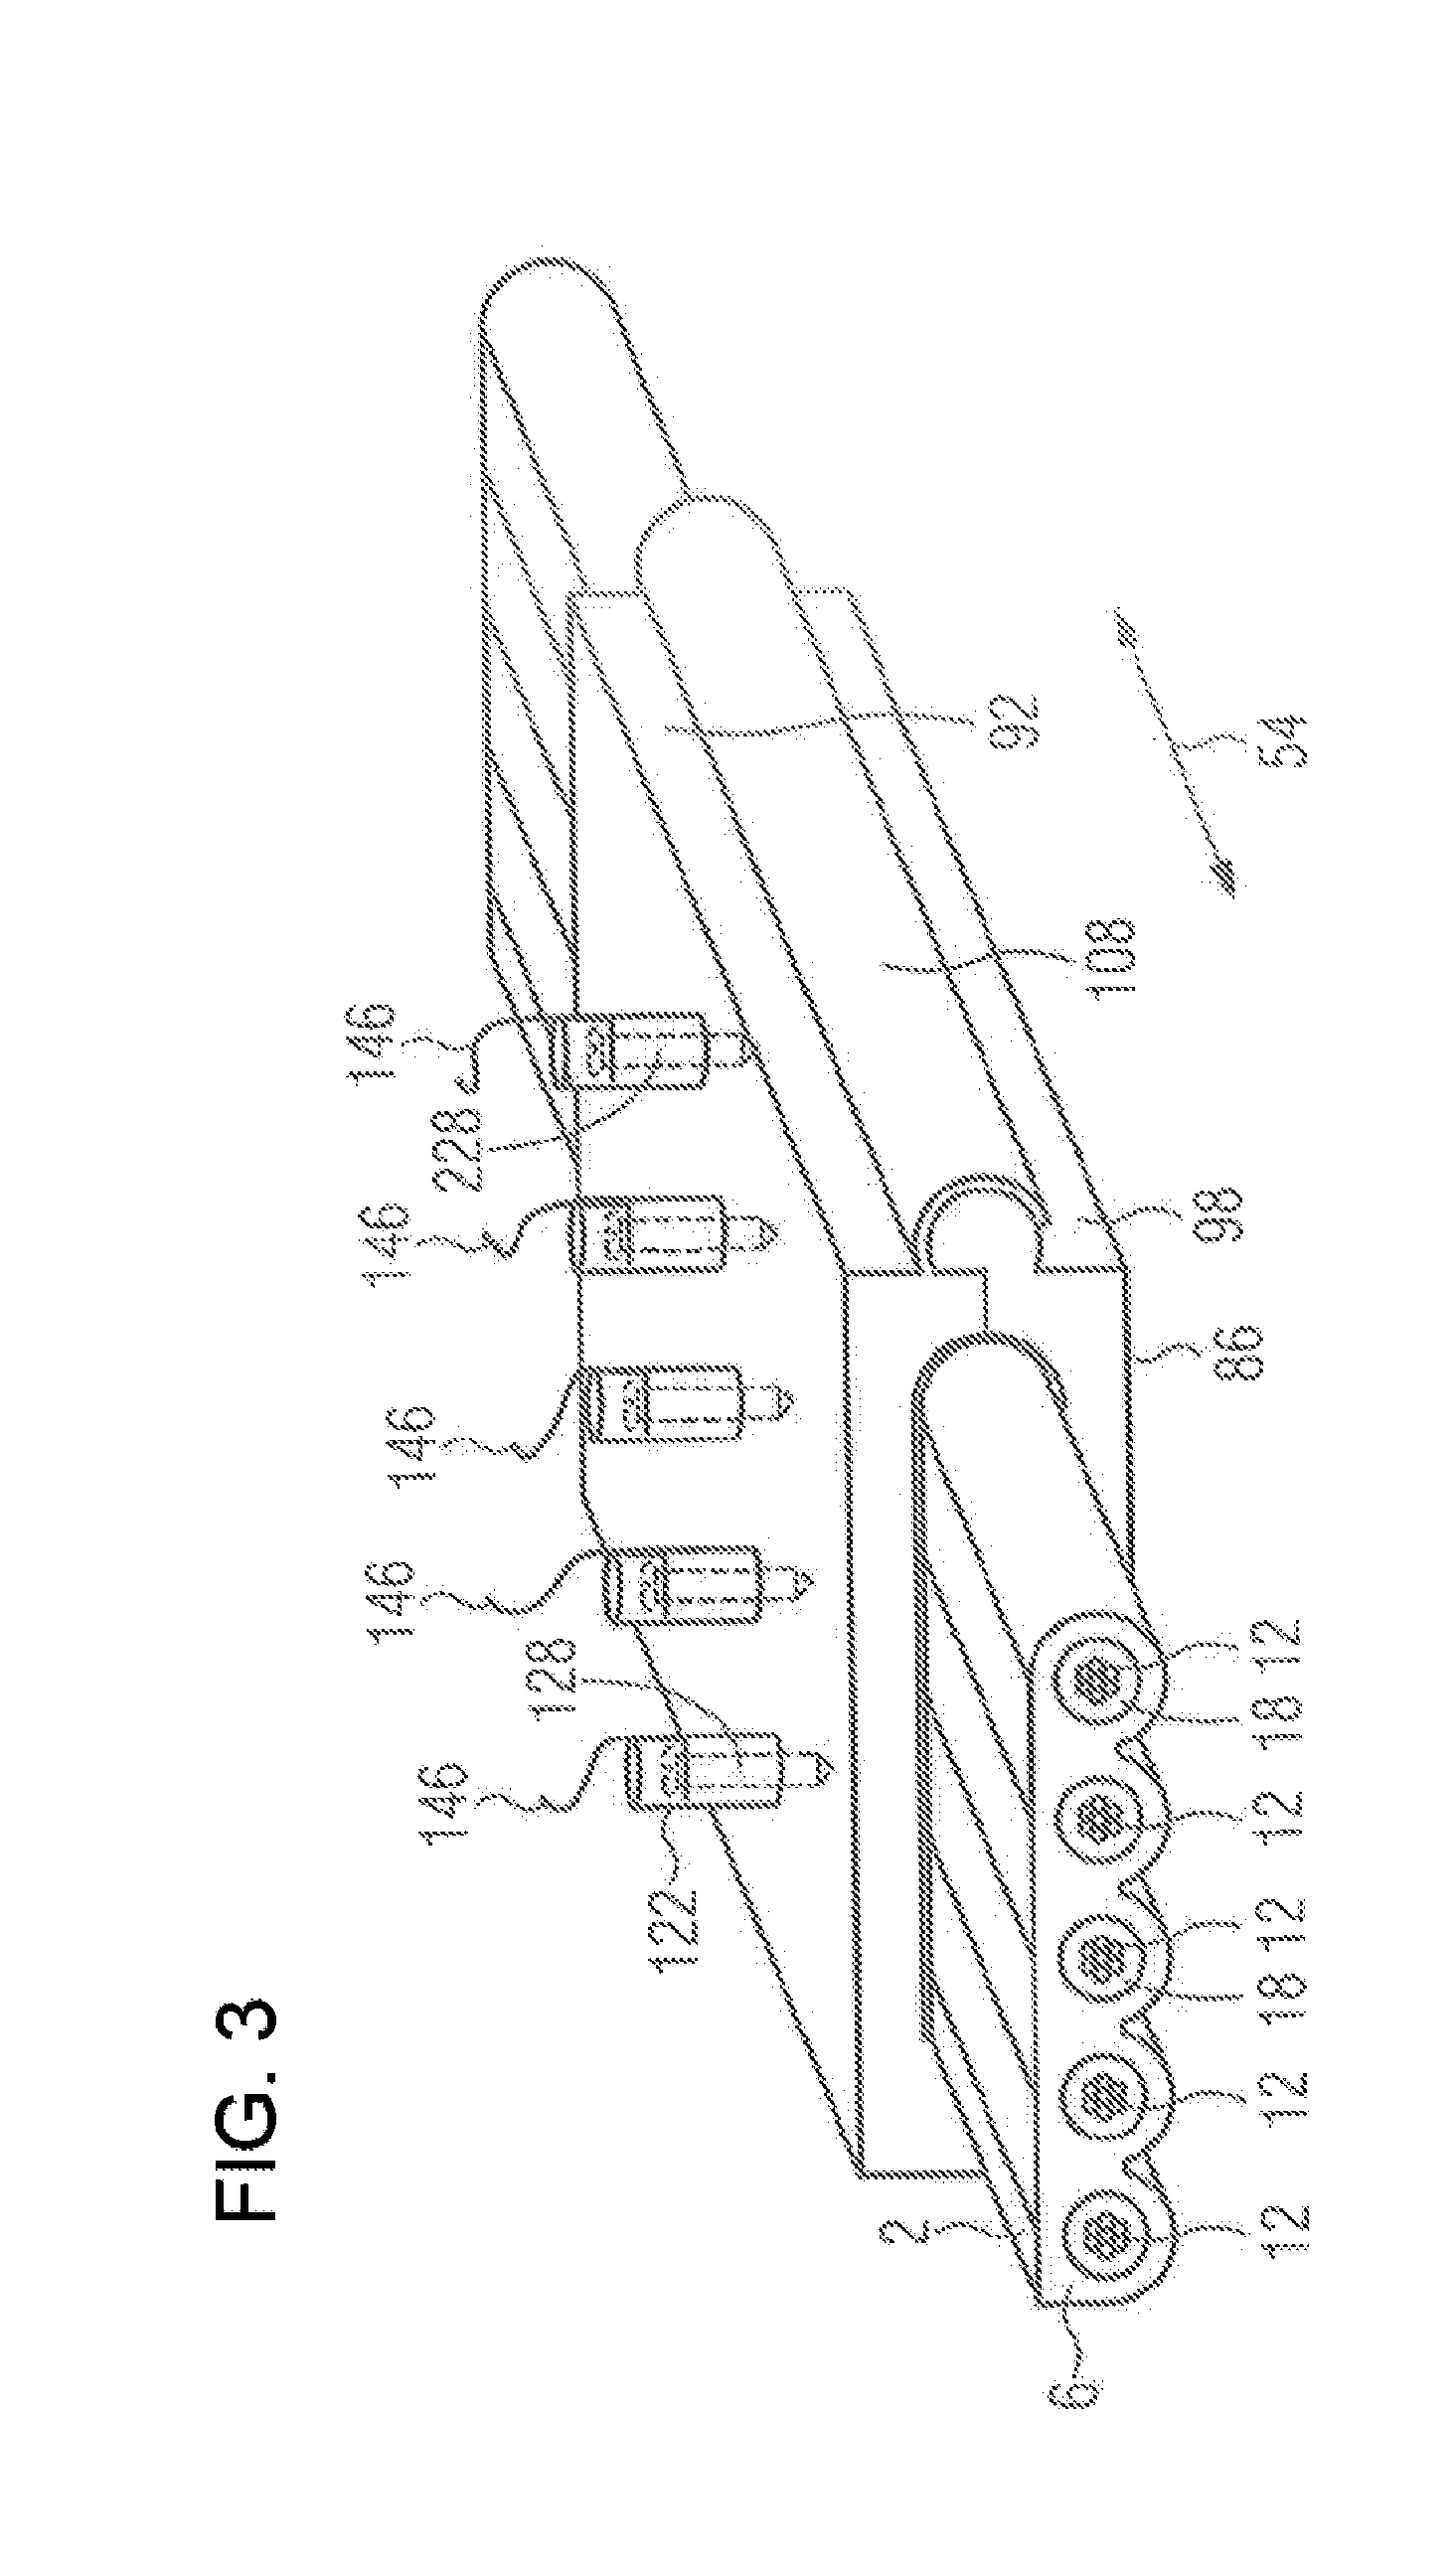 Electrical contact-making system